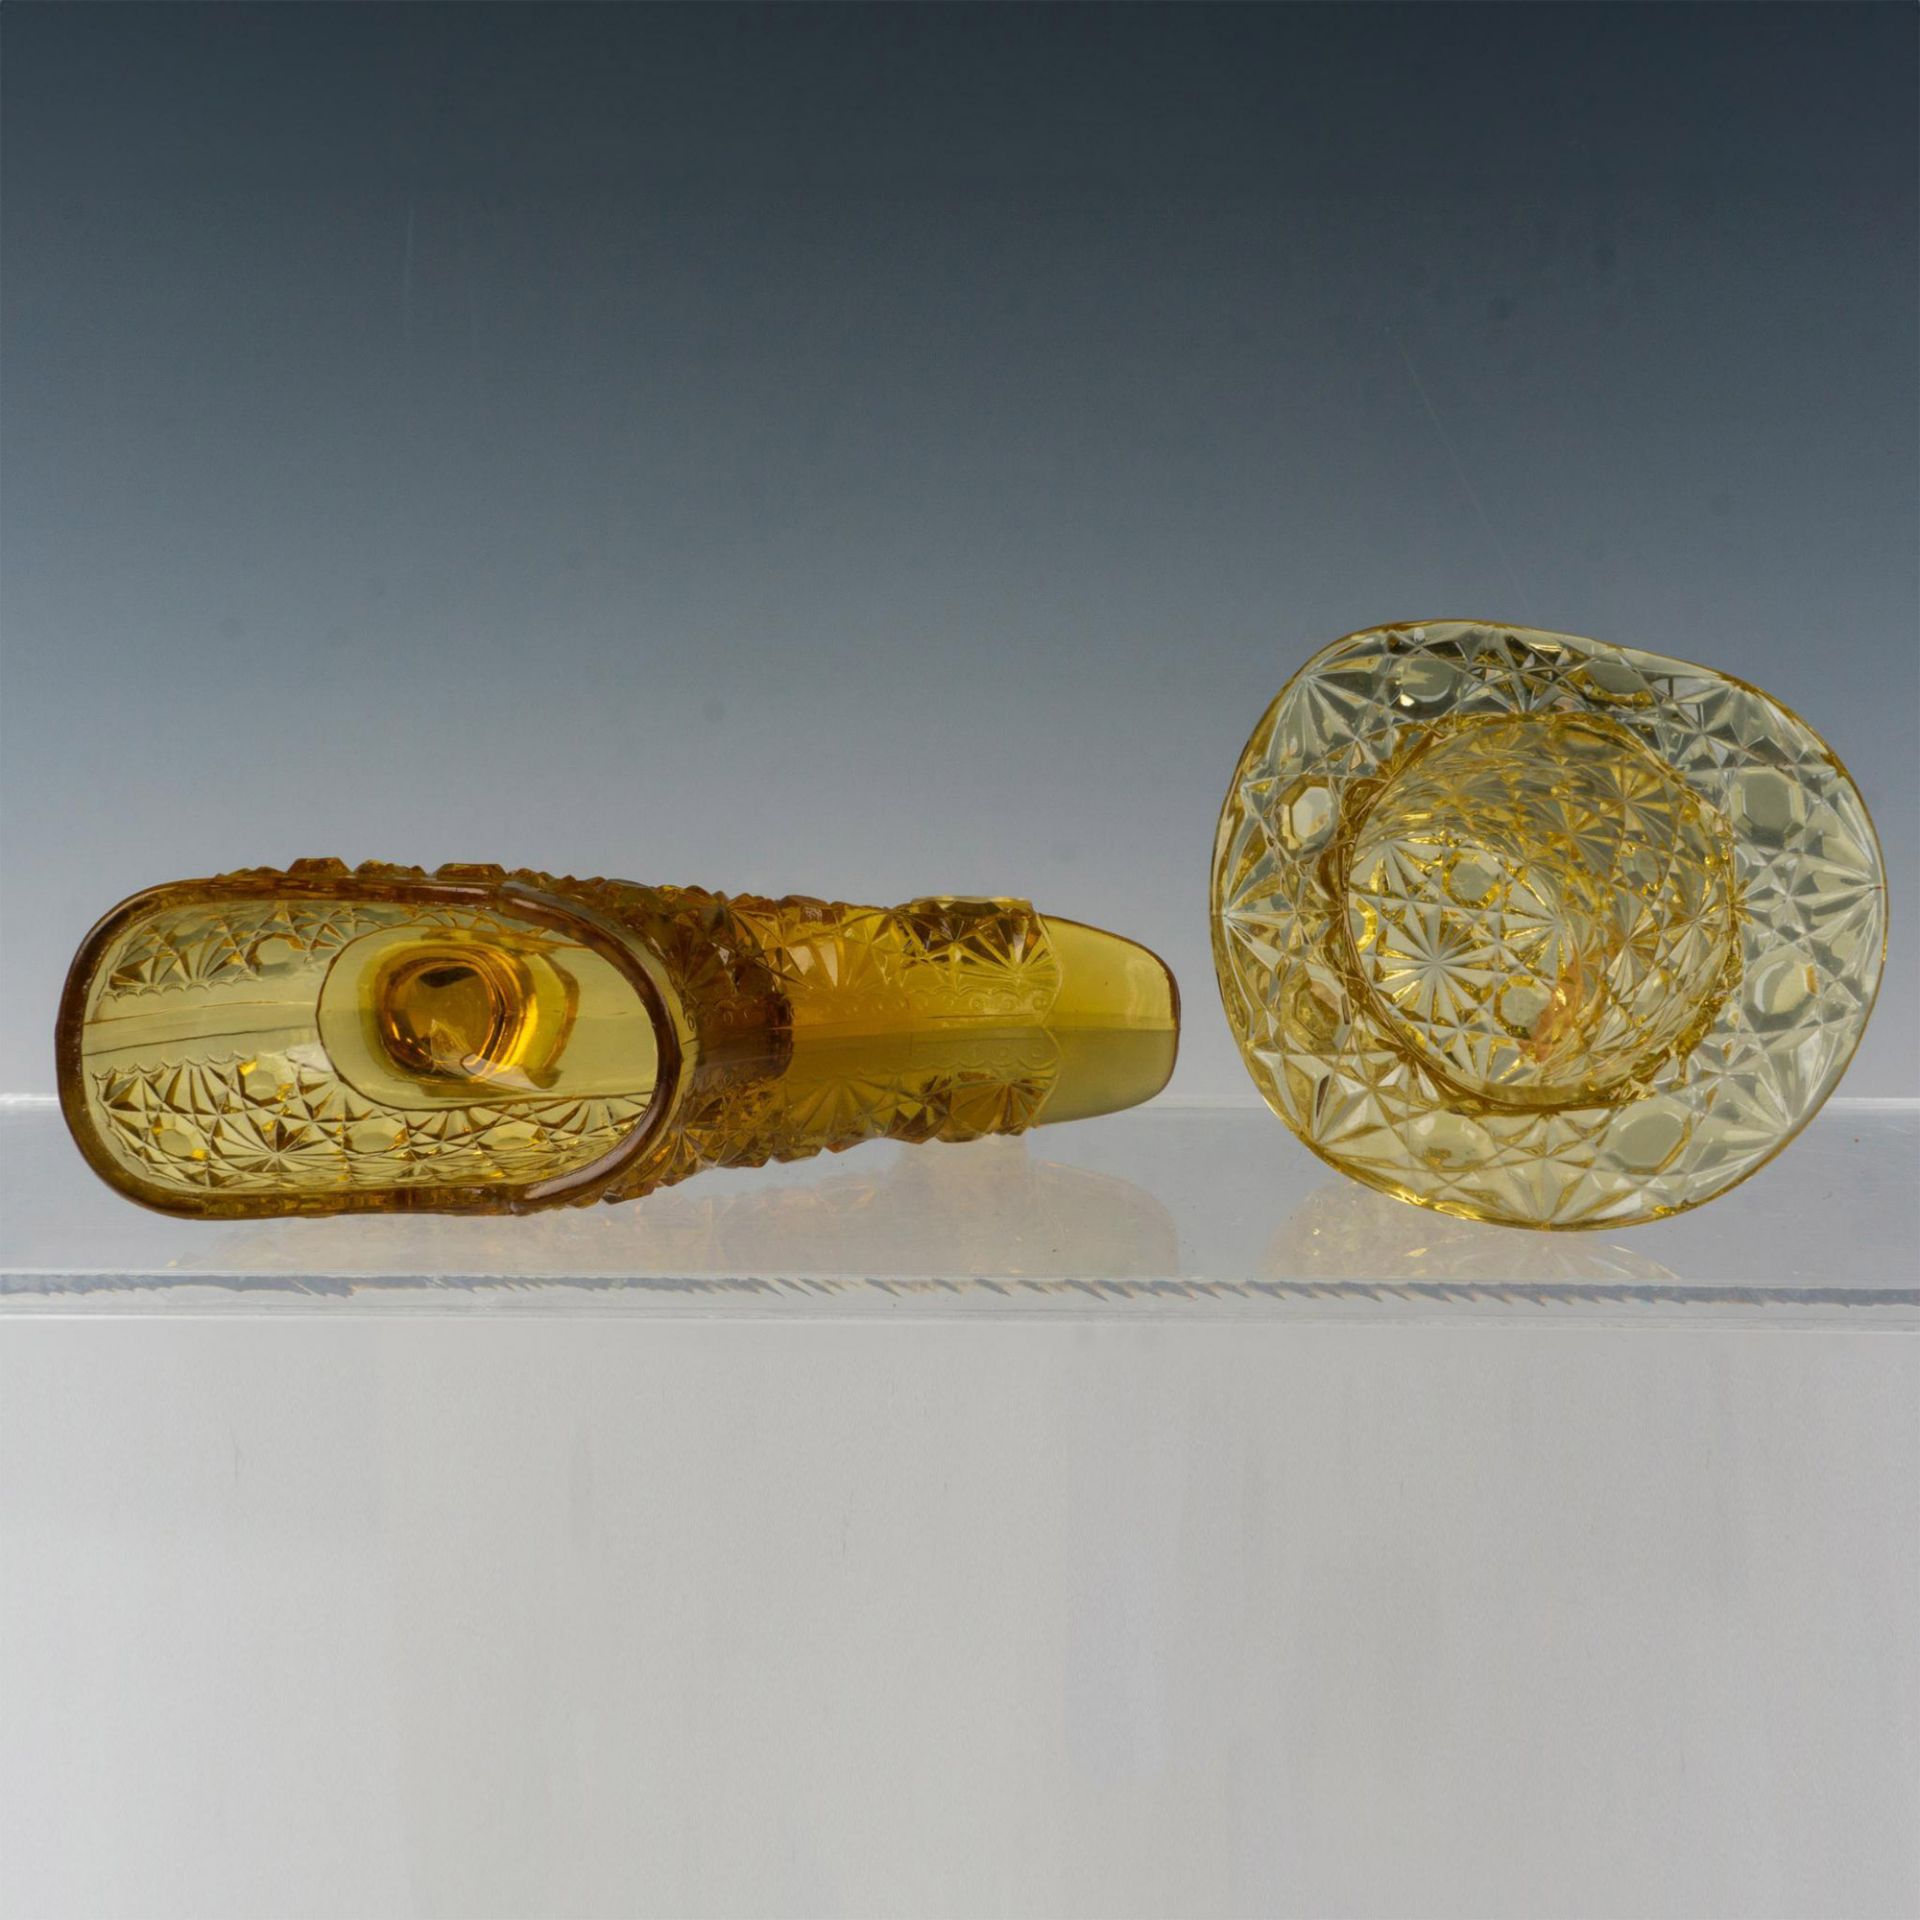 2pc Fenton Amber Glass Vases, Daisy Button - Image 3 of 3